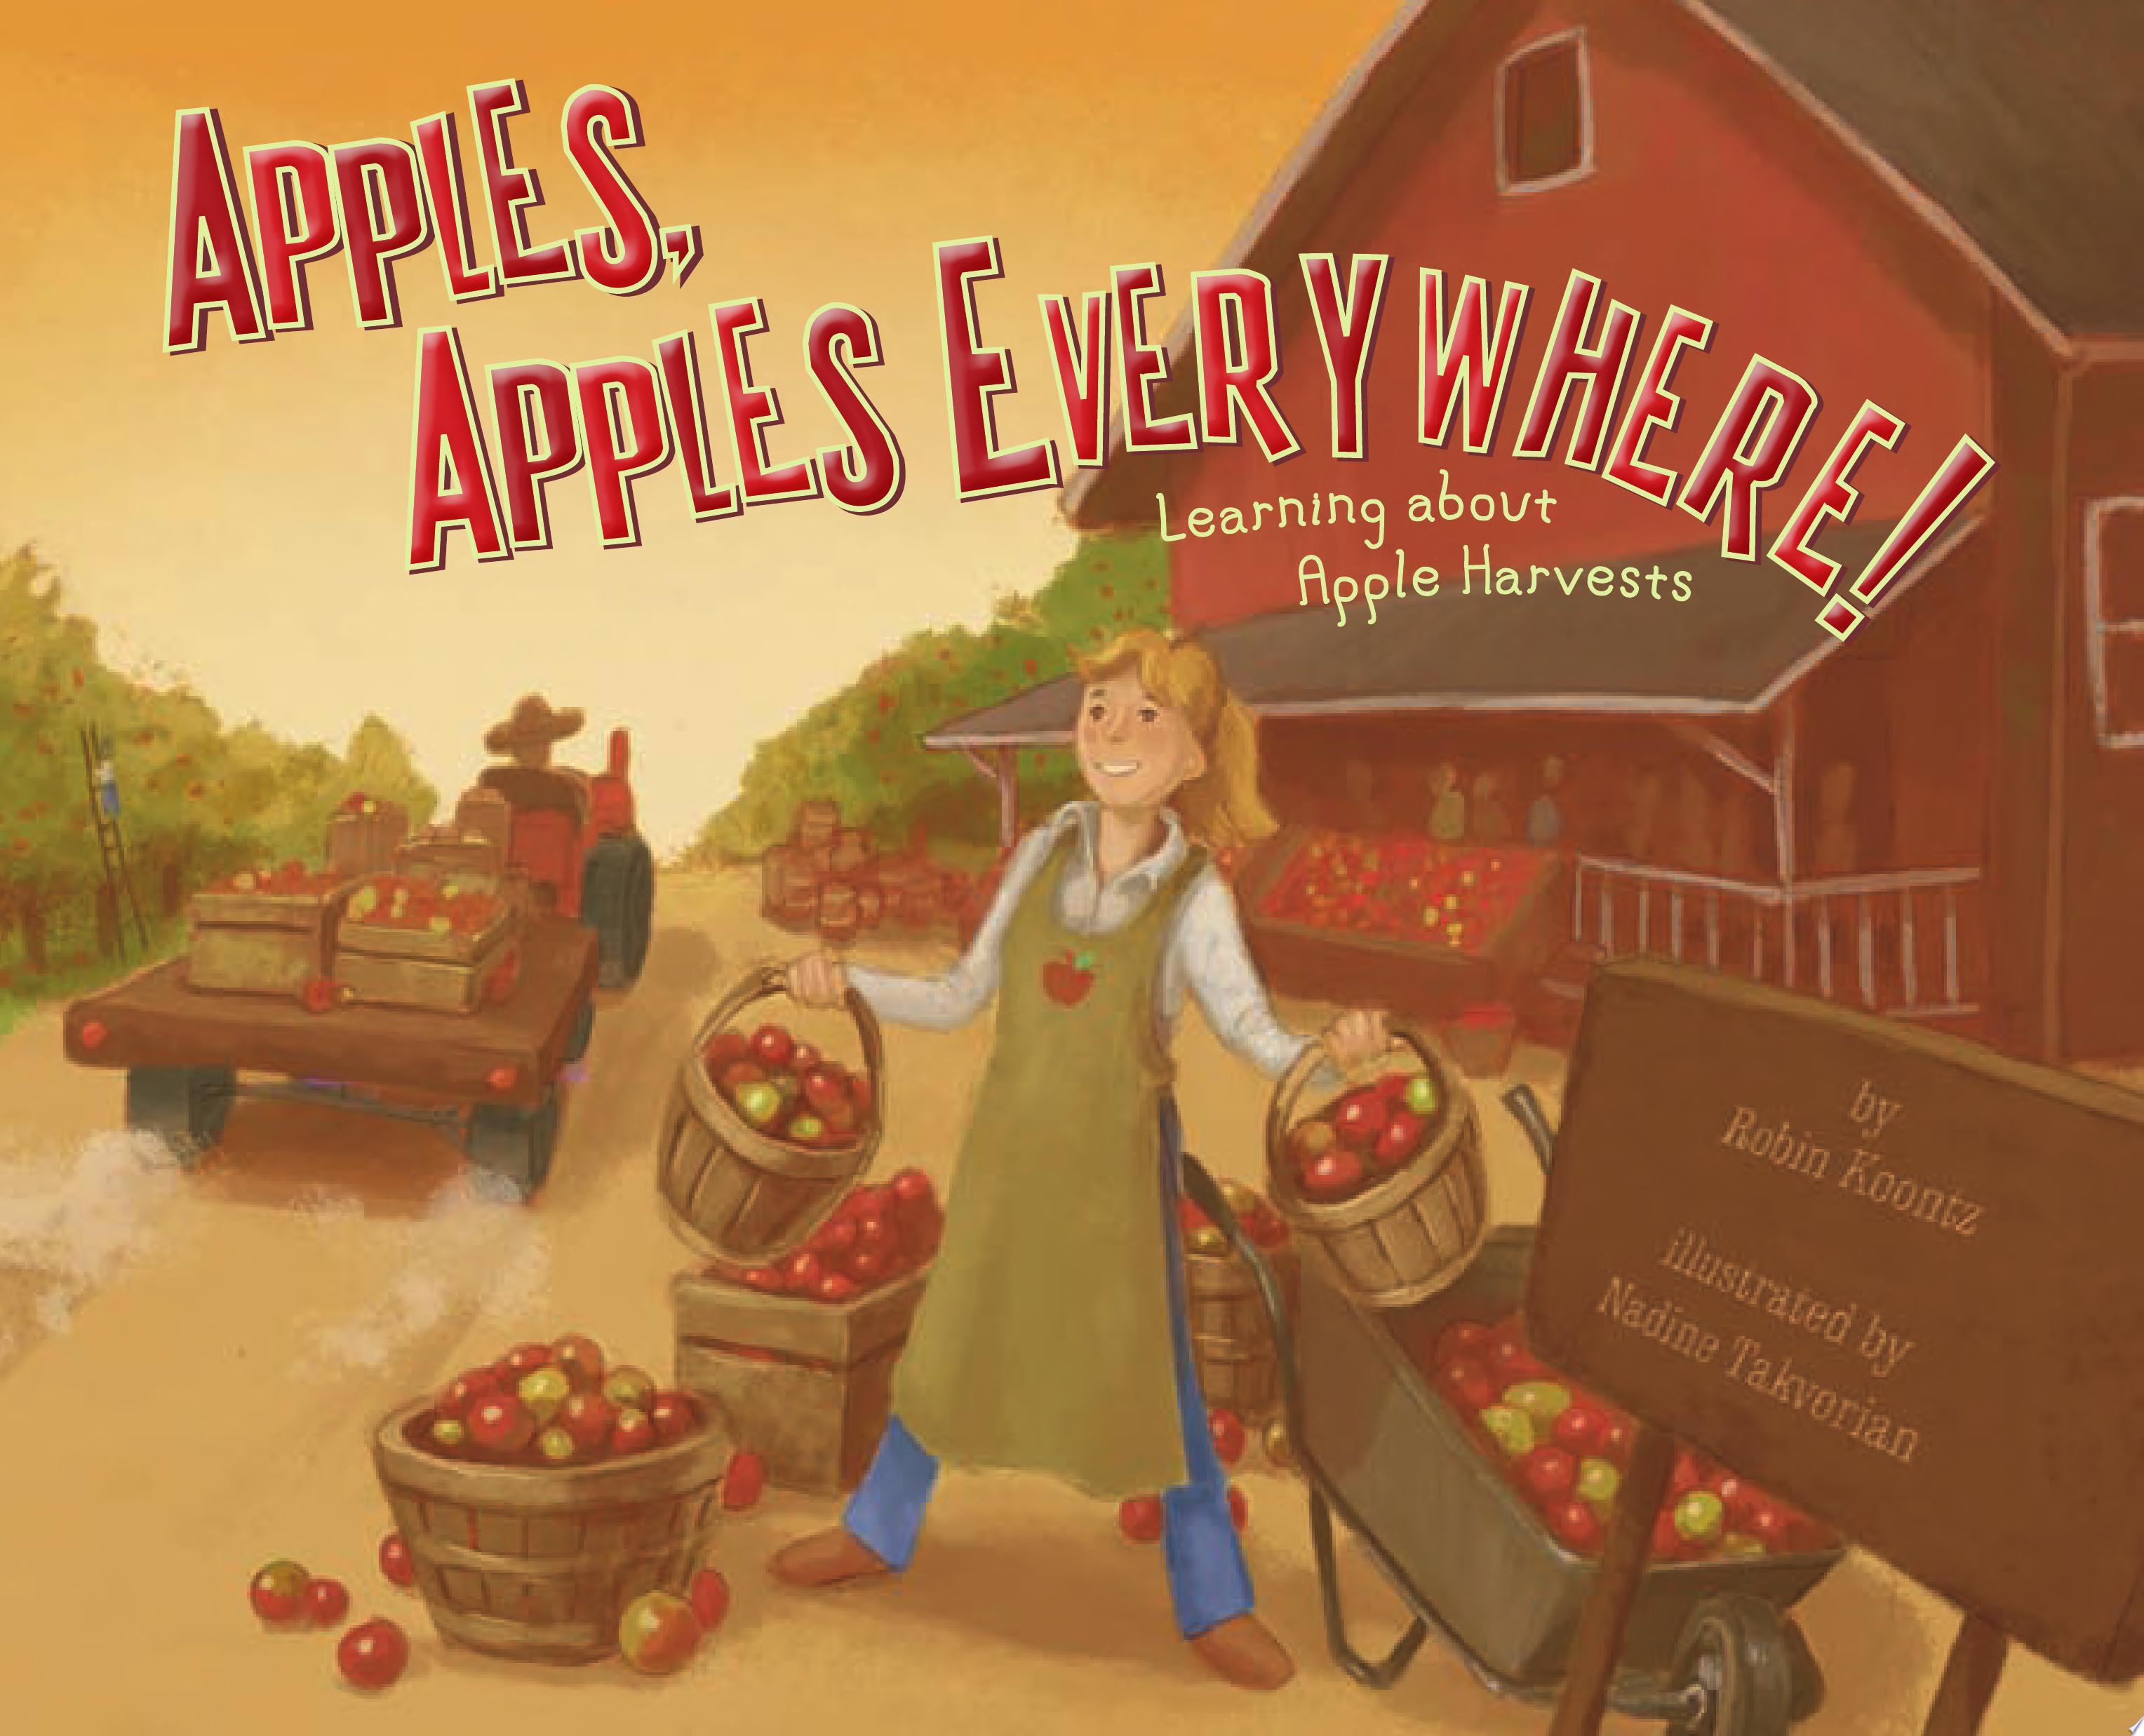 Image for "Apples, Apples Everywhere!"